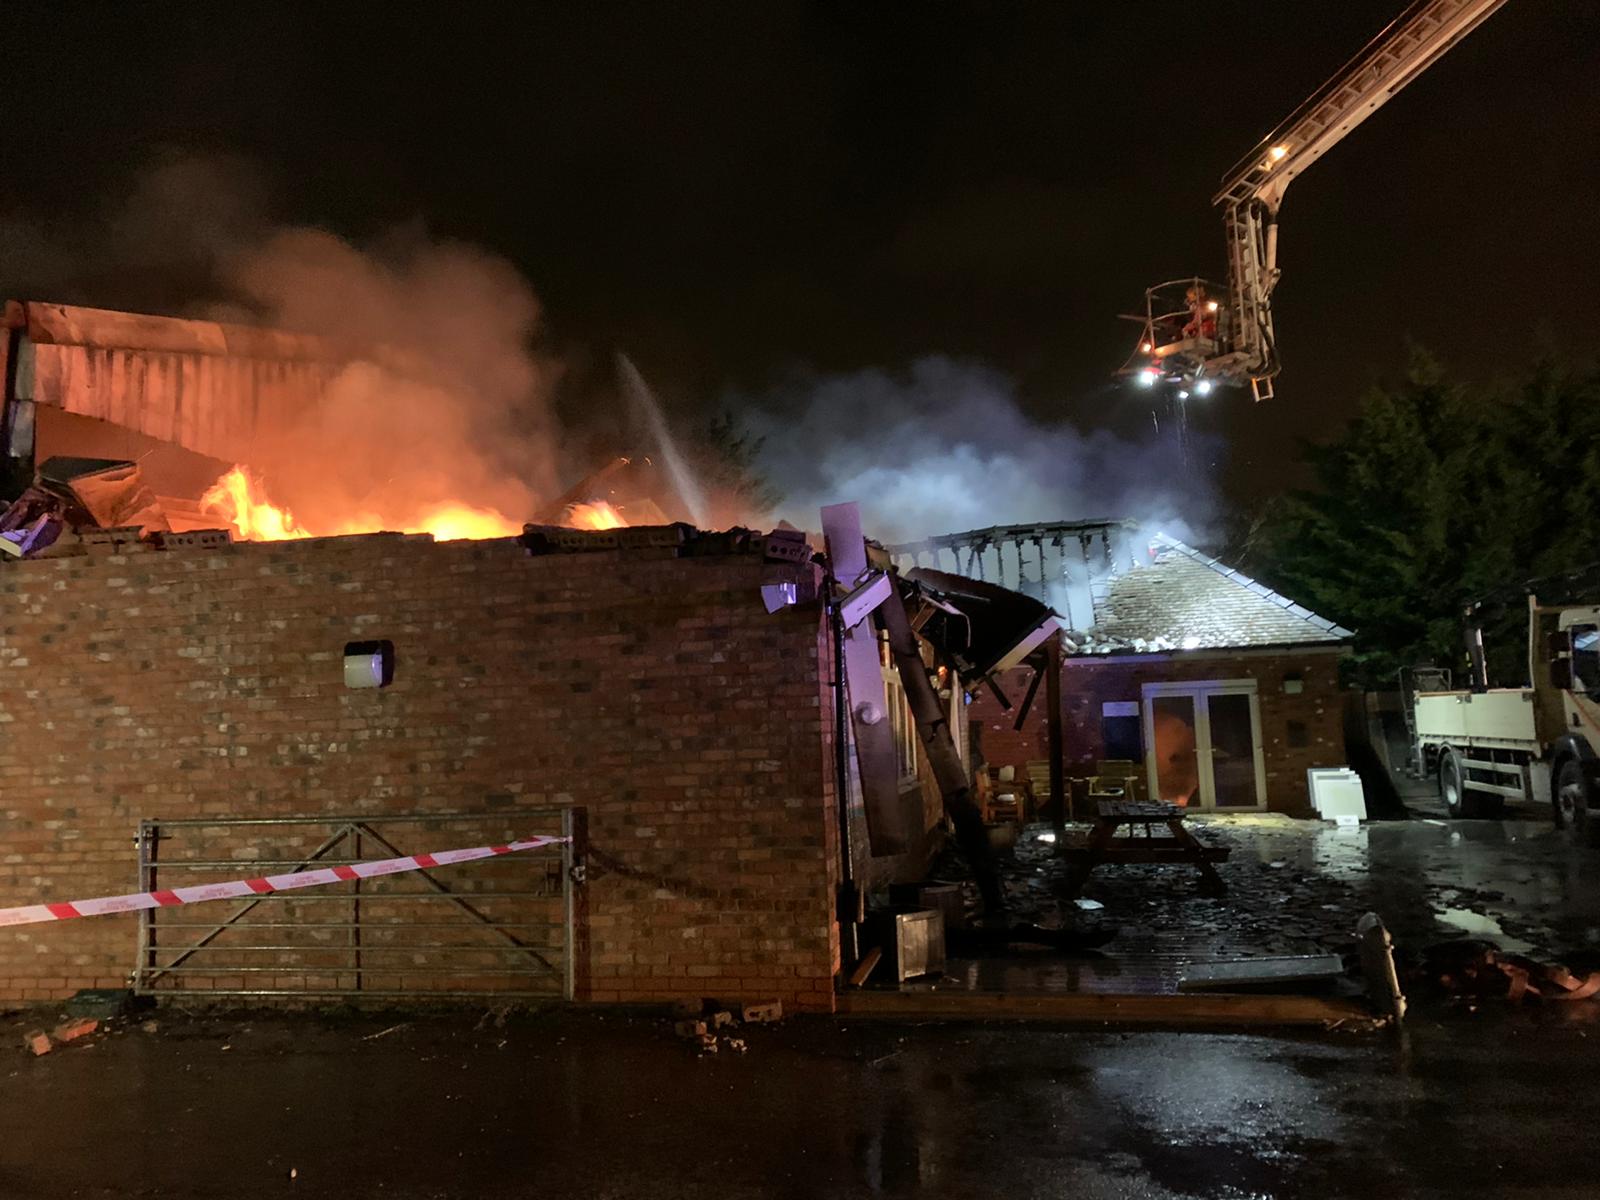 Six fire engines were called to tackle a huge blaze in Stockport last night, The Manc